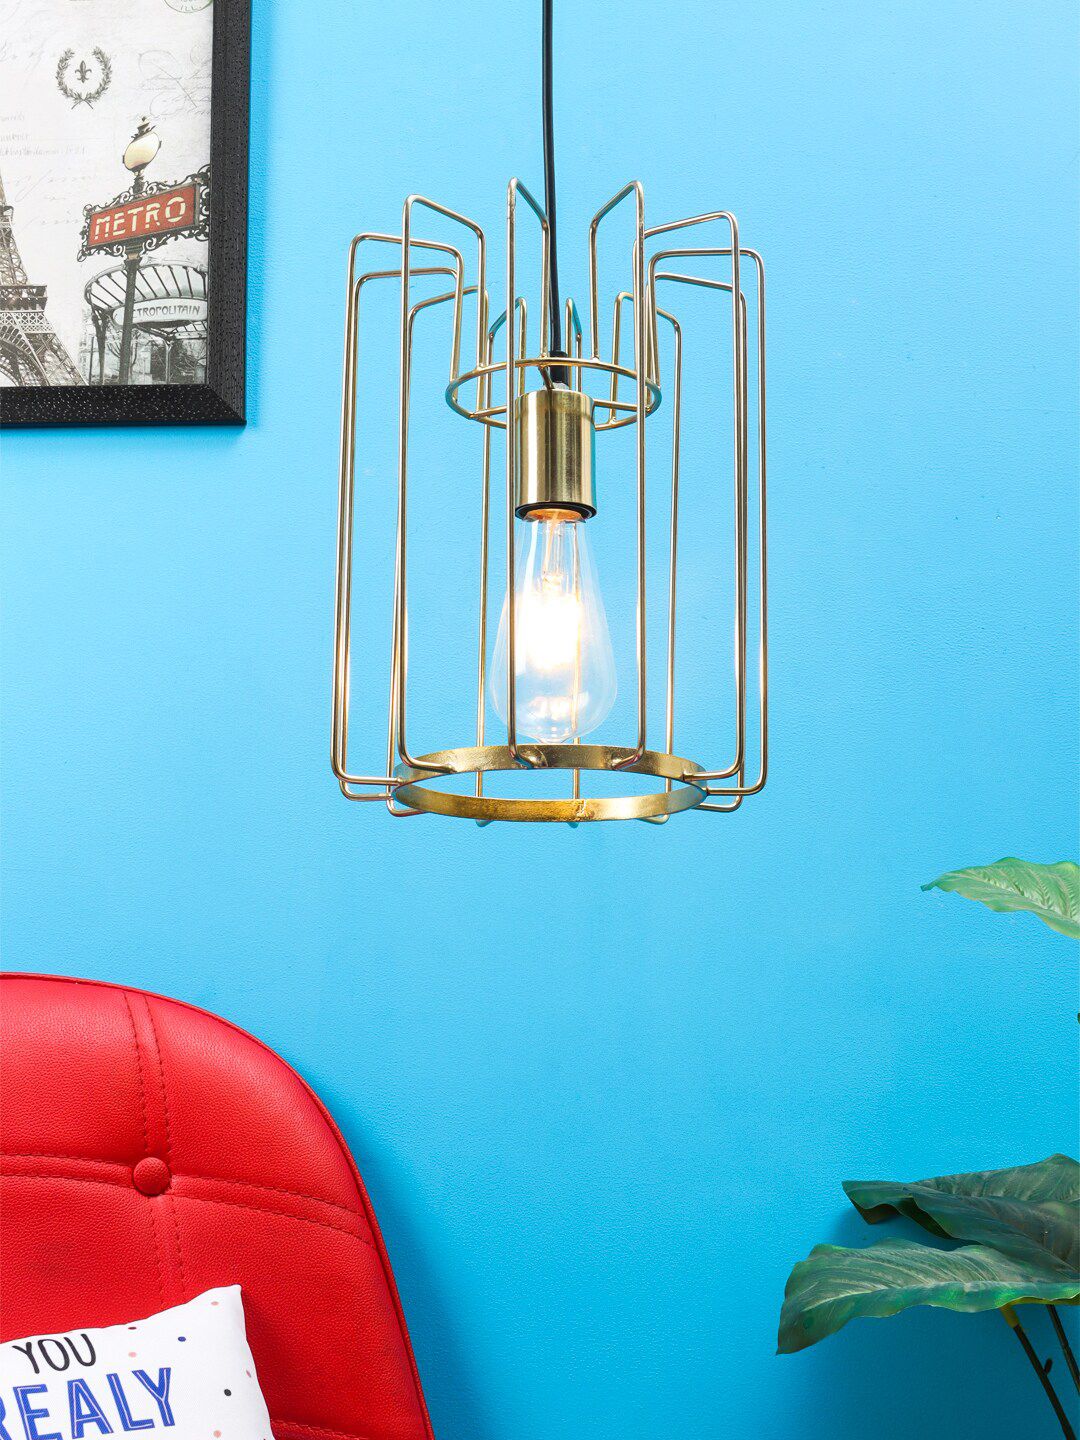 Aapno Rajasthan Gold-Toned Contemporary USP Pendant Lamp Price in India